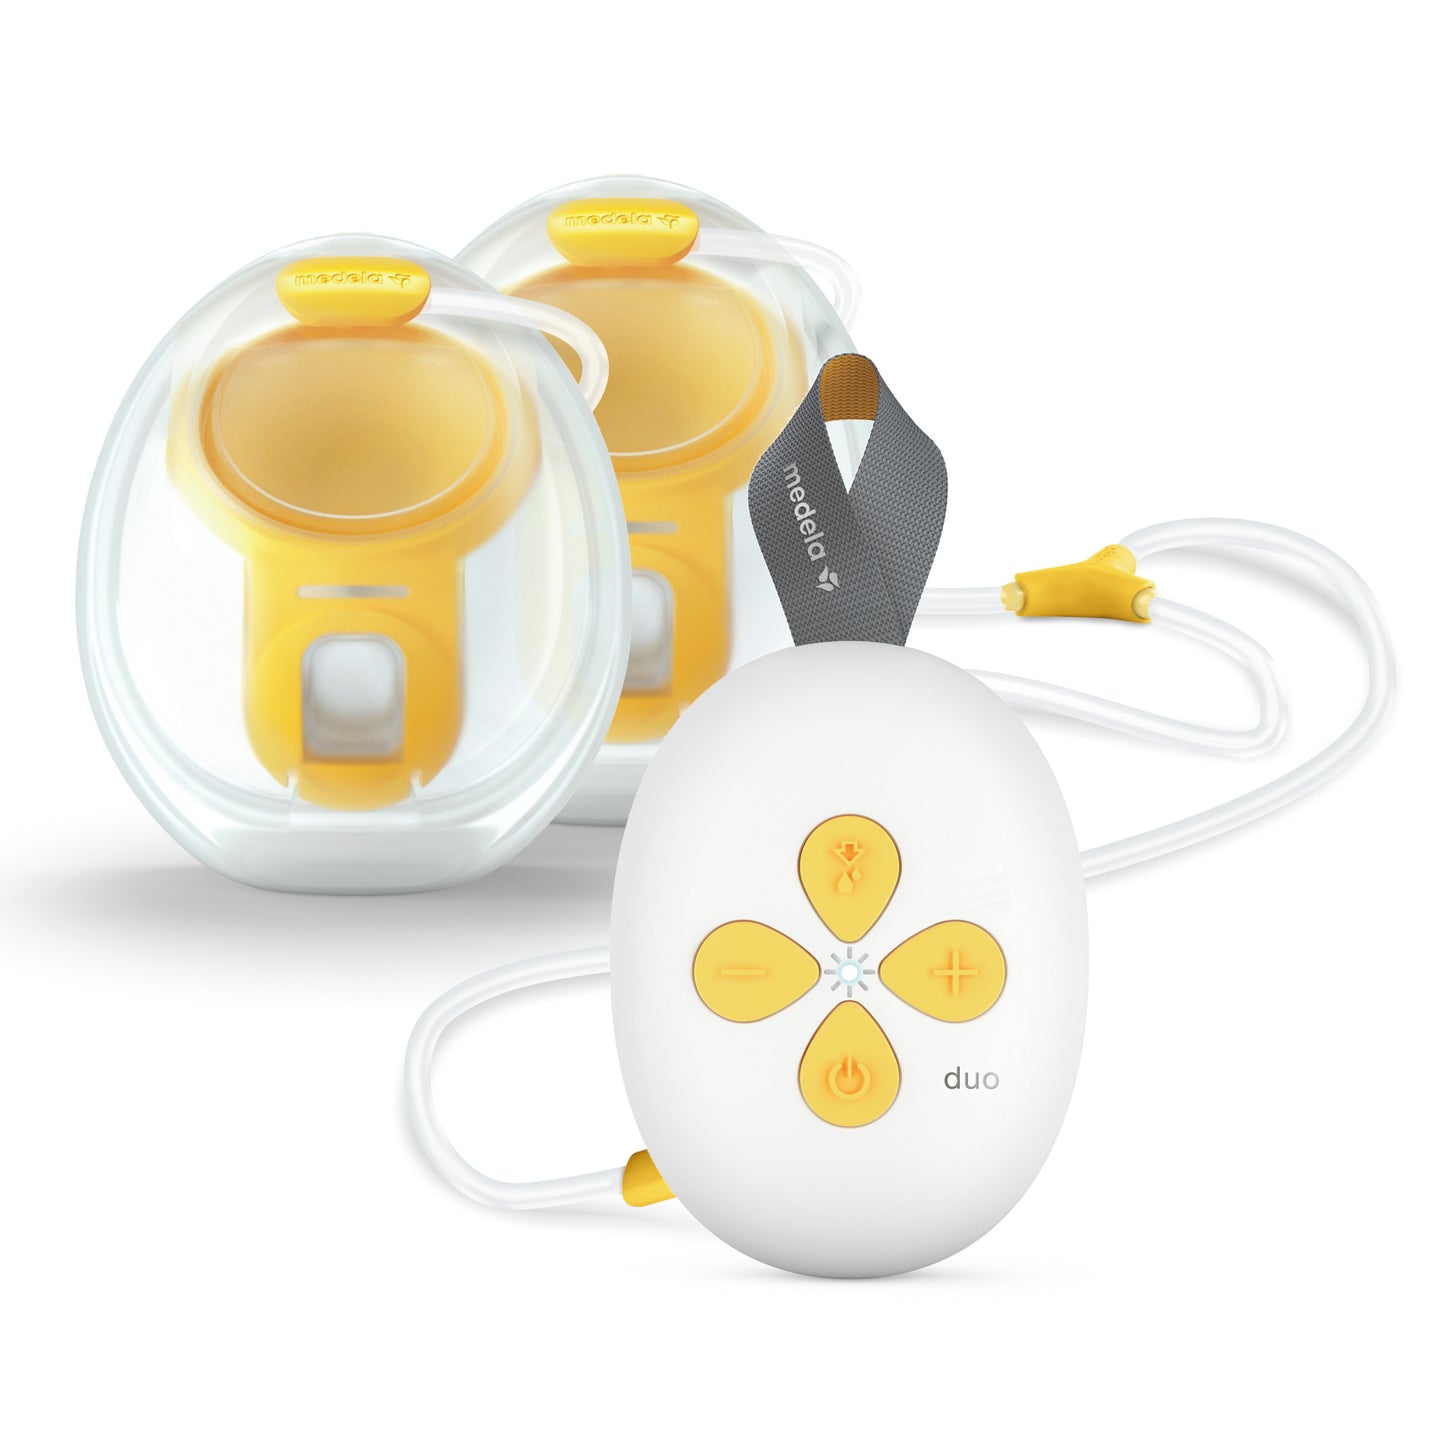 Medela Duo Hands-Free Double Electric Breast Pump - COMING SOON!